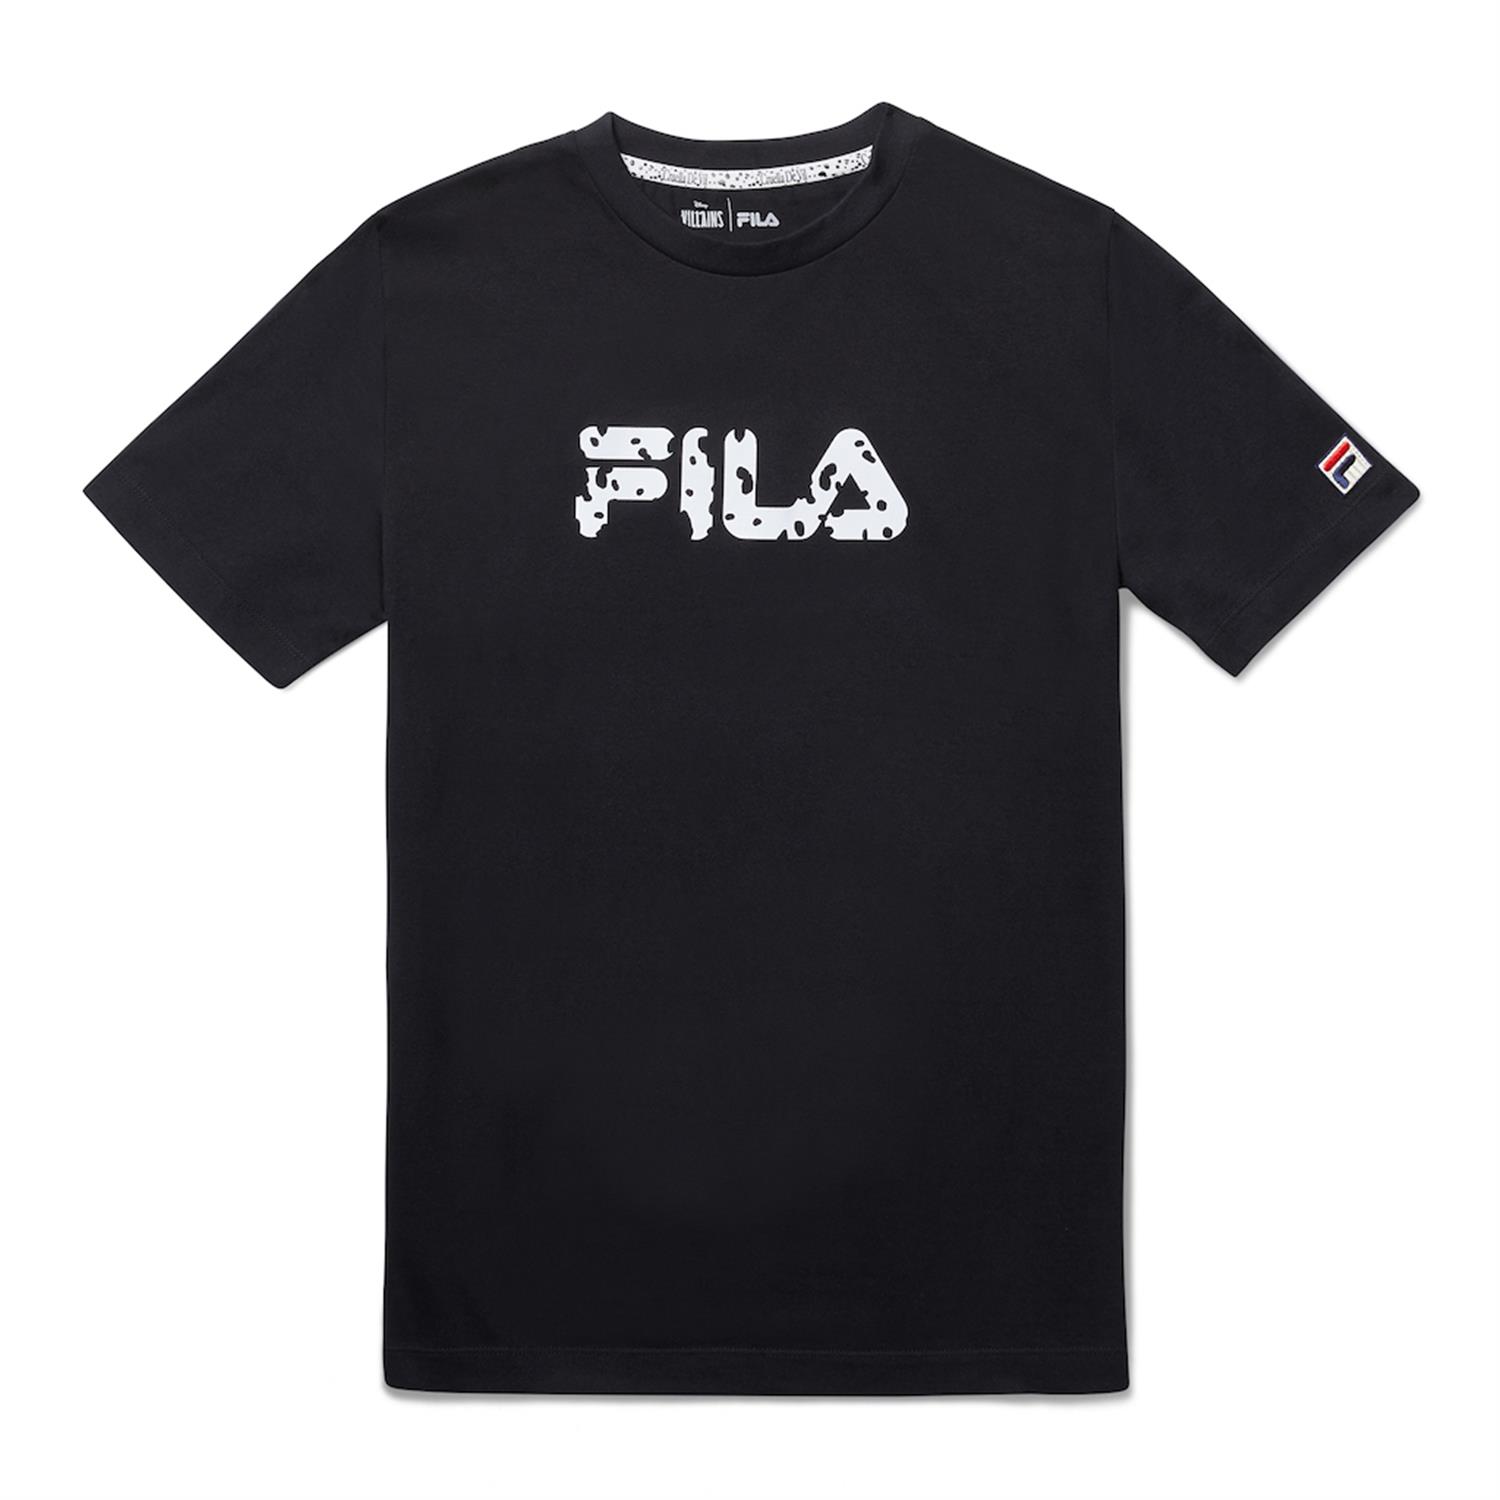 Disney Villains X FILA Collection Launches Exclusively on Urban Outfitters